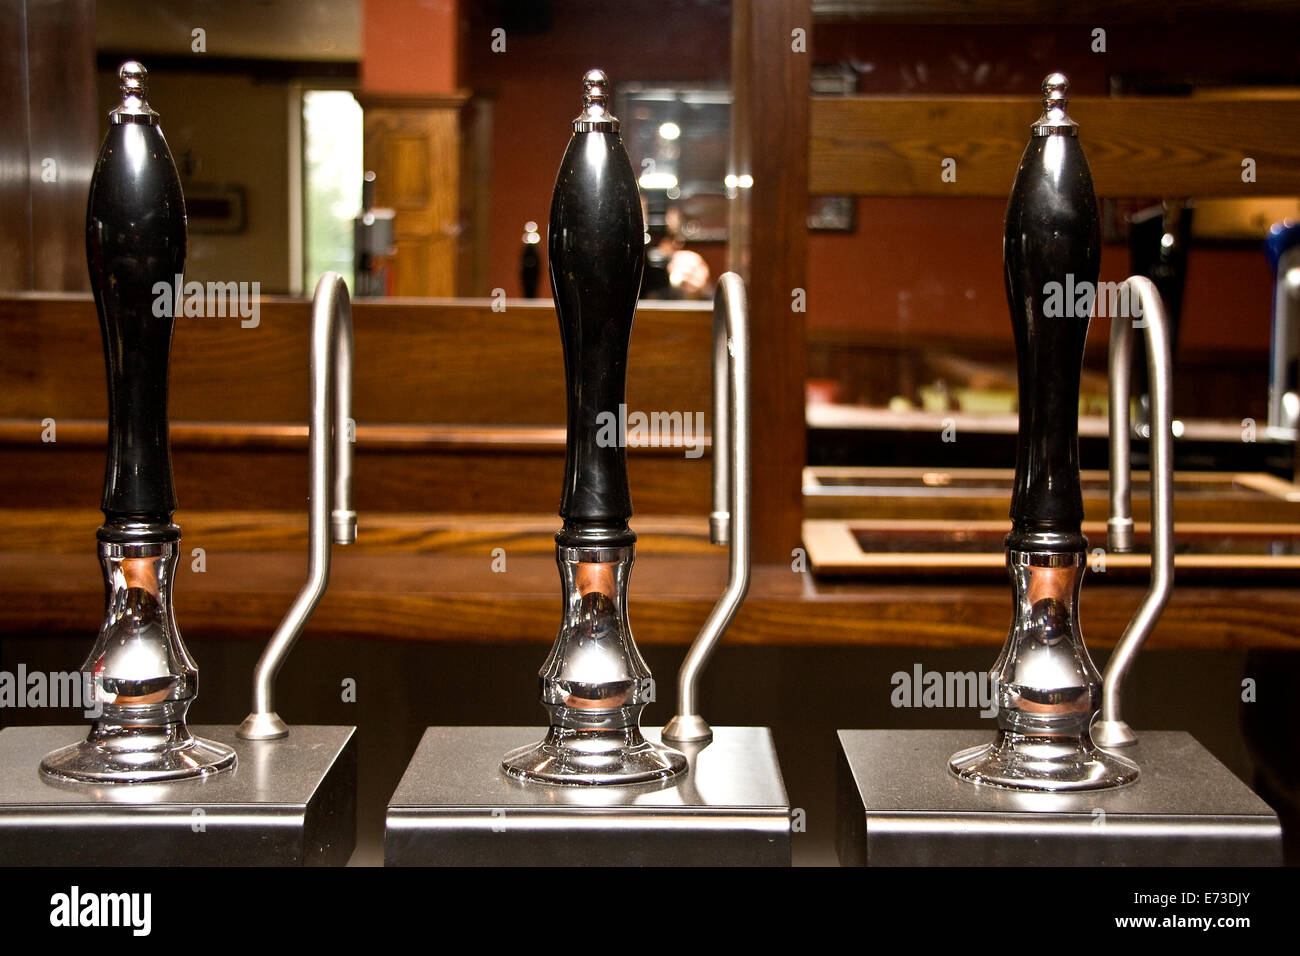 THE KINGSWAY FARM INN is a Family Pub / Restaurant owned by Greene King along Kings Cross Road in Dundee, UK Stock Photo